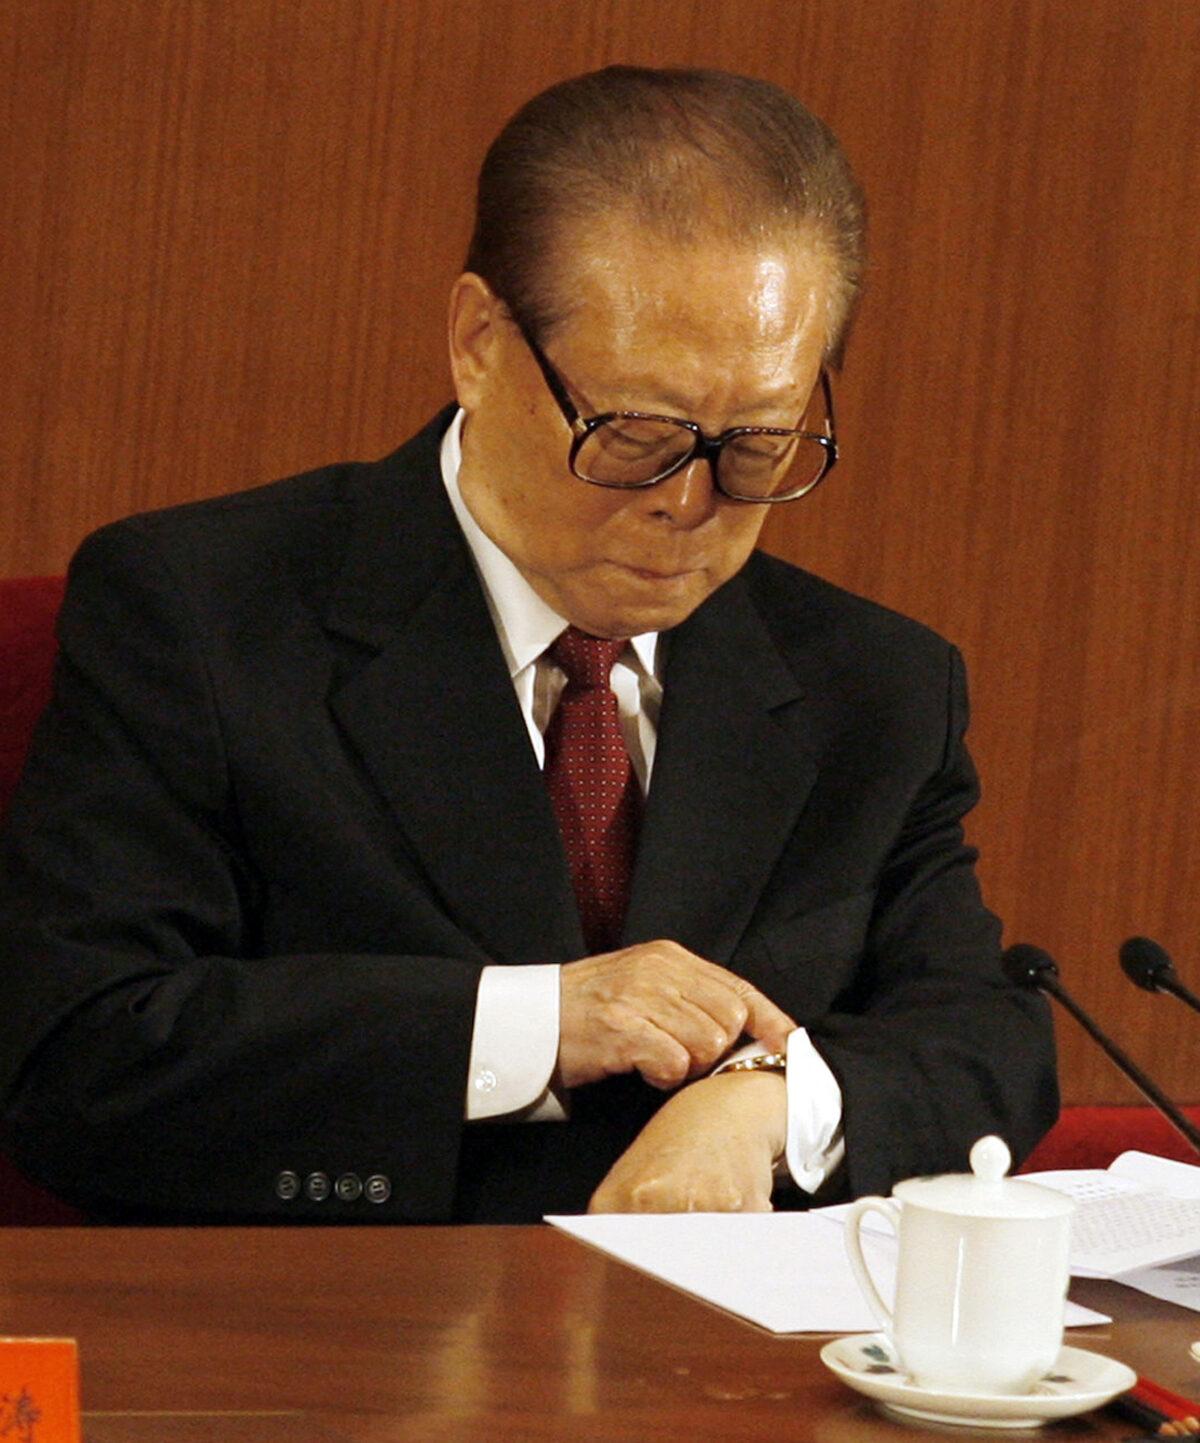 Former Chinese leader Jiang Zemin checks his watch as he listens to President Hu Jintao speak at a ceremony to mark the 80th anniversary of China's People's Liberation Army (PLA) in the Great Hall of the People in Beijing, on Aug. 1, 2007. (Peter Parks/AFP via Getty Images)